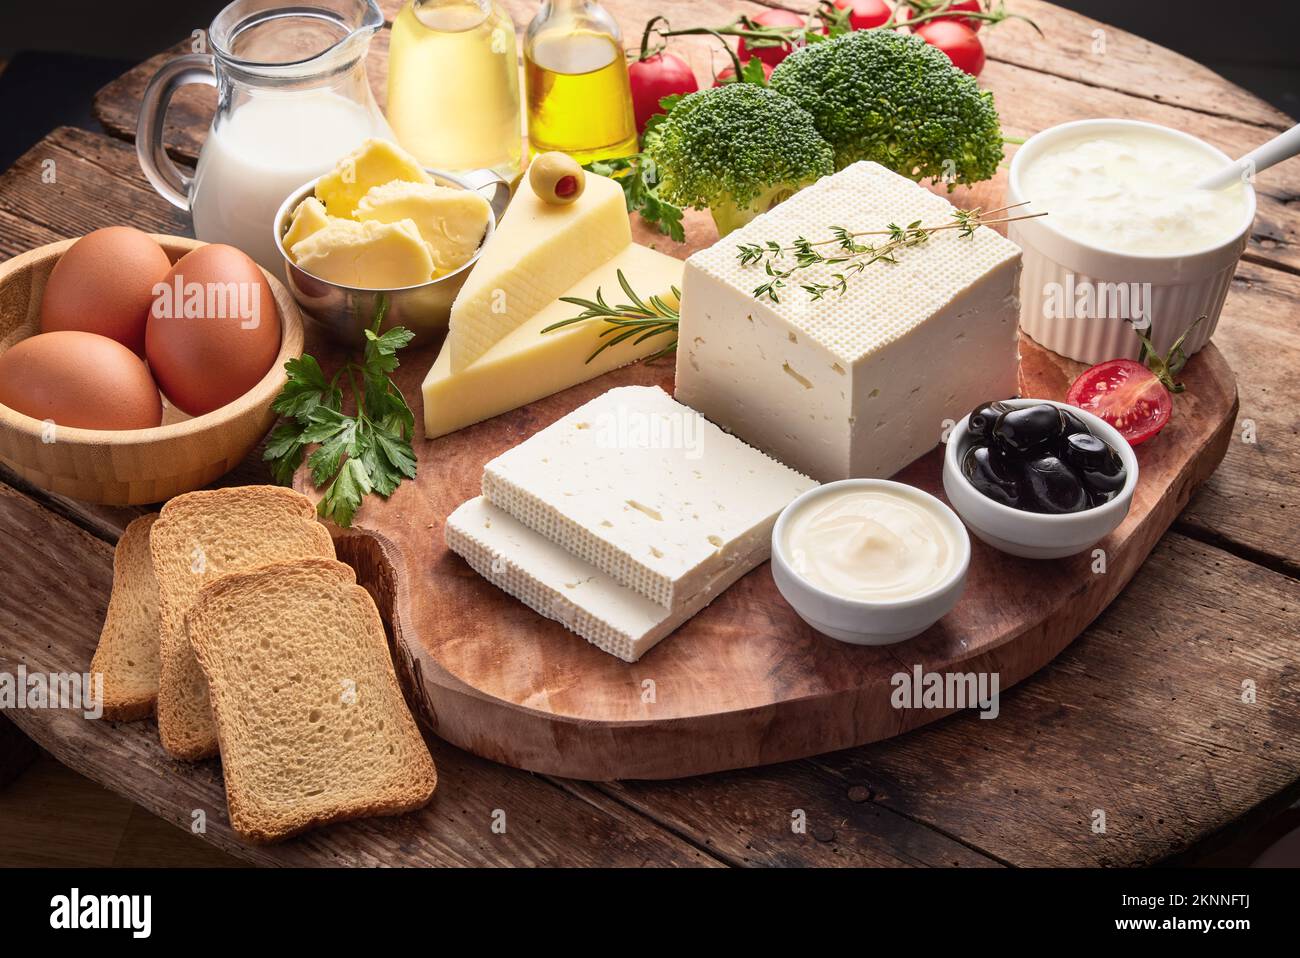 Fresh dairy products isolated on wooden background. Food collage of milk, cheese, butter, egg, vegetables, herbs, bread. Stock Photo